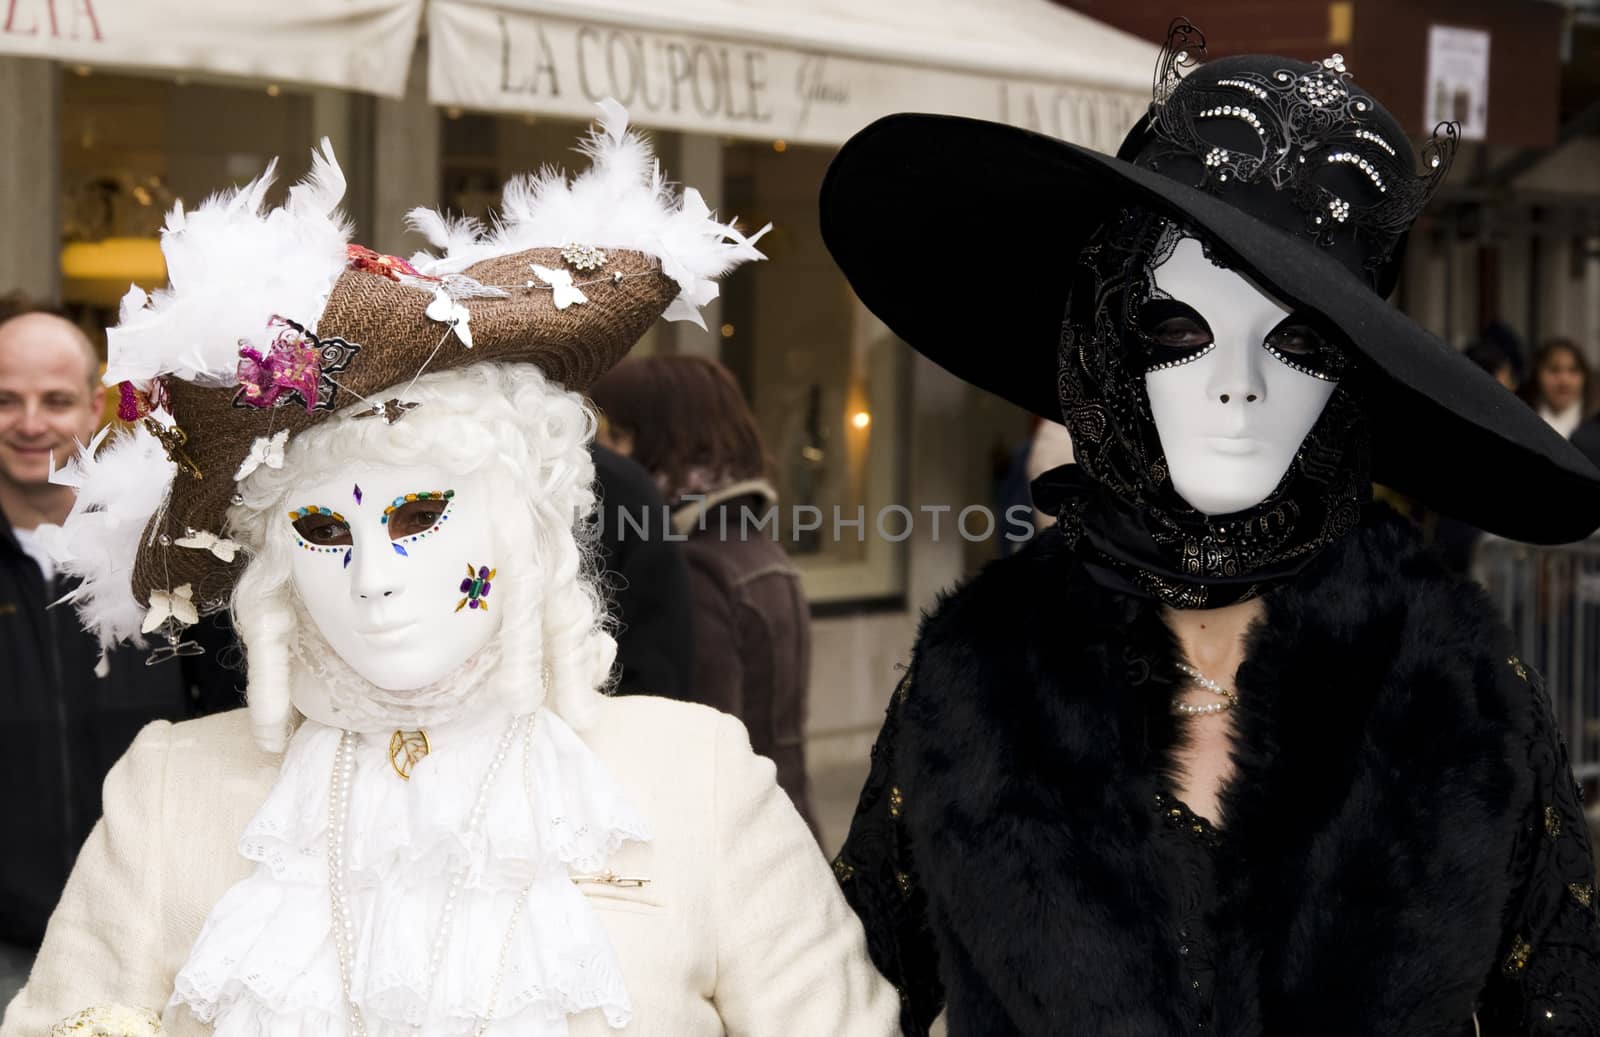 VENICE, ITALY - FEBRUARY 27: Participant in The Carnival, an annual festival that starts around two weeks before Ash Wednesday and ends on Shrove Tuesday or Mardi Gras on February 27, 2011 in Venice, Italy